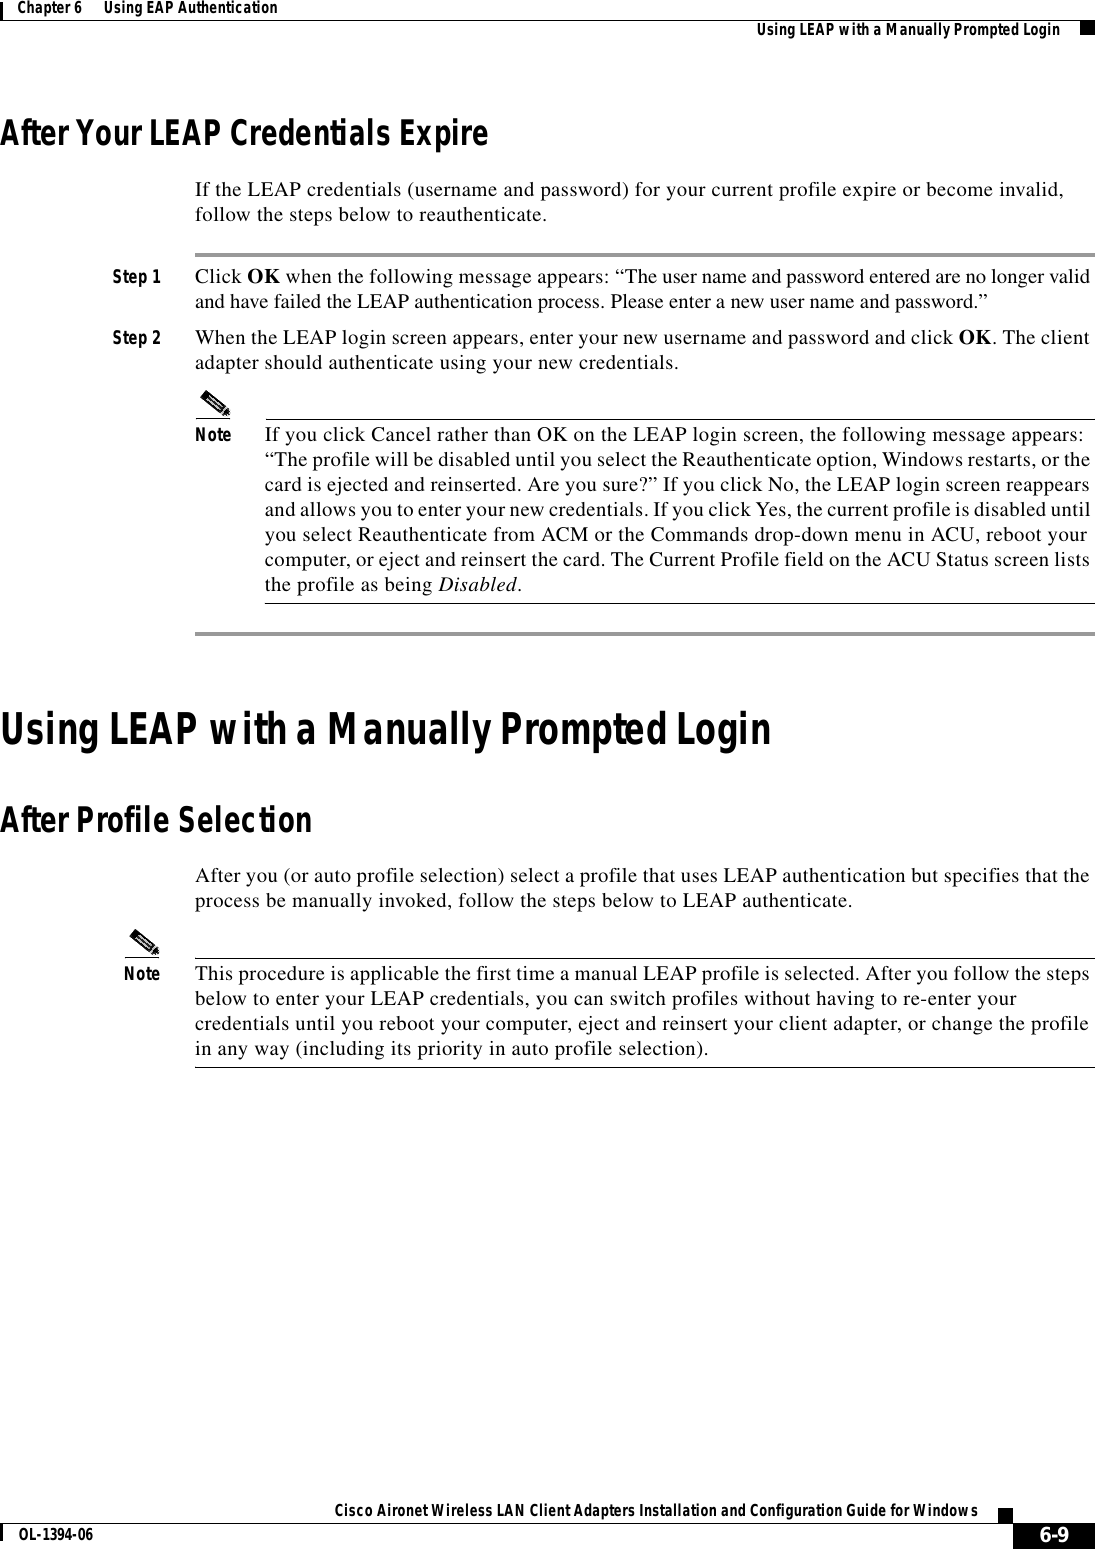 6-9Cisco Aironet Wireless LAN Client Adapters Installation and Configuration Guide for WindowsOL-1394-06Chapter 6      Using EAP Authentication Using LEAP with a Manually Prompted LoginAfter Your LEAP Credentials ExpireIf the LEAP credentials (username and password) for your current profile expire or become invalid, follow the steps below to reauthenticate.Step 1 Click OK when the following message appears: “The user name and password entered are no longer valid and have failed the LEAP authentication process. Please enter a new user name and password.”Step 2 When the LEAP login screen appears, enter your new username and password and click OK. The client adapter should authenticate using your new credentials.Note If you click Cancel rather than OK on the LEAP login screen, the following message appears: “The profile will be disabled until you select the Reauthenticate option, Windows restarts, or the card is ejected and reinserted. Are you sure?” If you click No, the LEAP login screen reappears and allows you to enter your new credentials. If you click Yes, the current profile is disabled until you select Reauthenticate from ACM or the Commands drop-down menu in ACU, reboot your computer, or eject and reinsert the card. The Current Profile field on the ACU Status screen lists the profile as being Disabled.Using LEAP with a Manually Prompted LoginAfter Profile SelectionAfter you (or auto profile selection) select a profile that uses LEAP authentication but specifies that the process be manually invoked, follow the steps below to LEAP authenticate.Note This procedure is applicable the first time a manual LEAP profile is selected. After you follow the steps below to enter your LEAP credentials, you can switch profiles without having to re-enter your credentials until you reboot your computer, eject and reinsert your client adapter, or change the profile in any way (including its priority in auto profile selection).